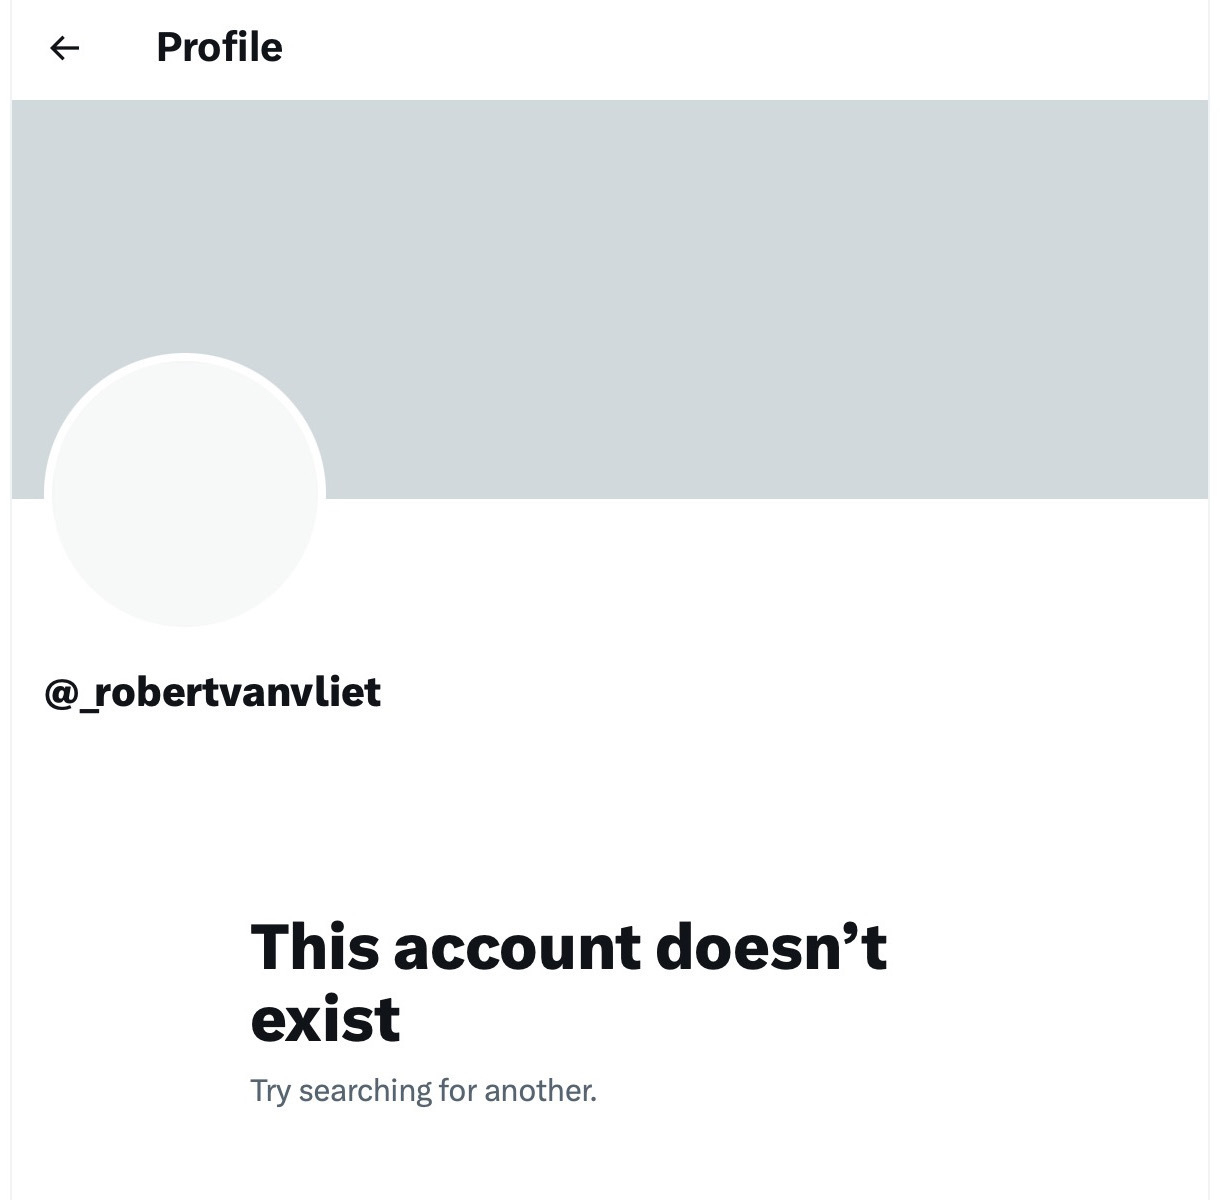 Screenshot of my deactivated Twitter account, with the message: This account doesn't exist. Try searching for another.